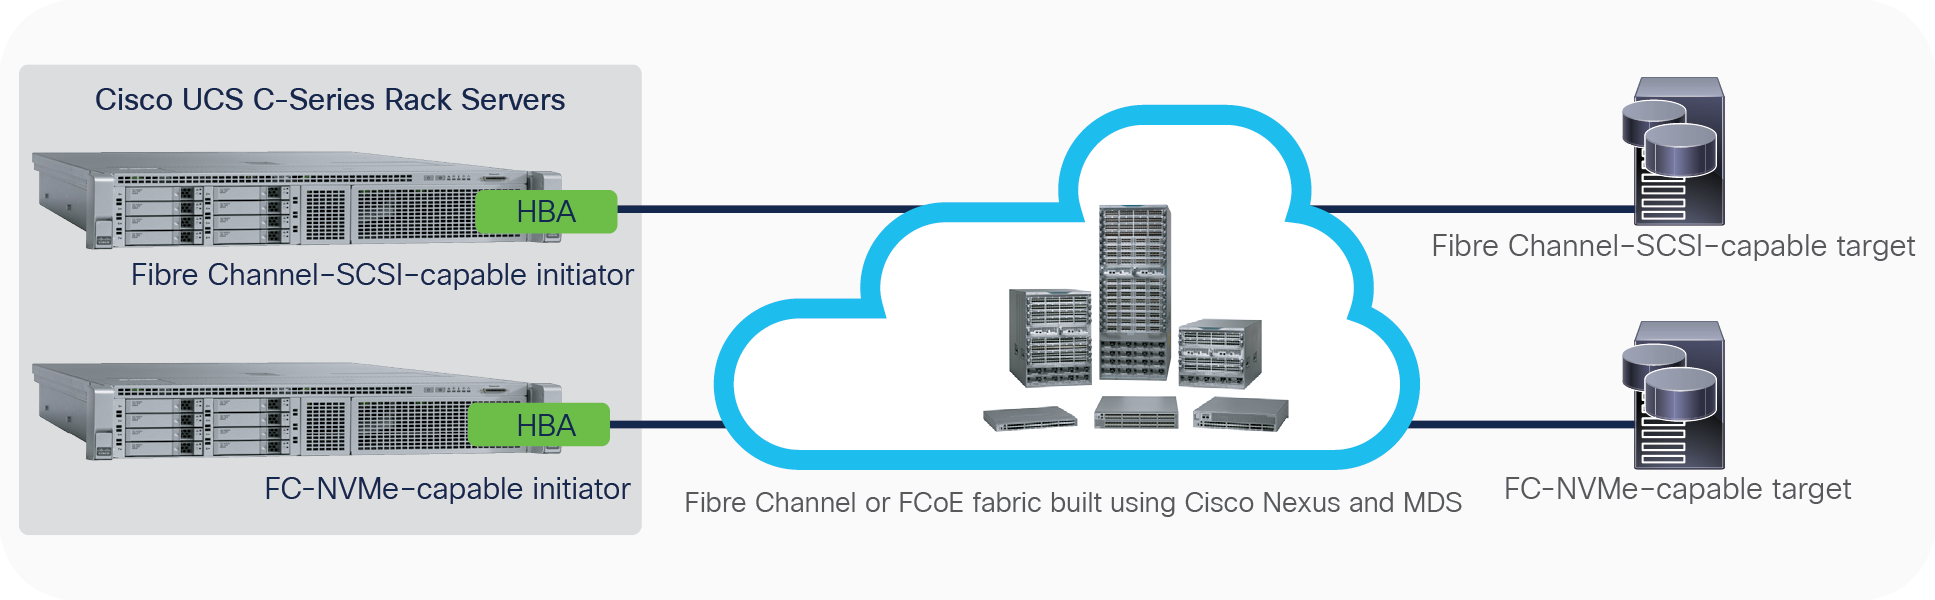 Seamless migration to FC-NVMe using Cisco Nexus and MDS